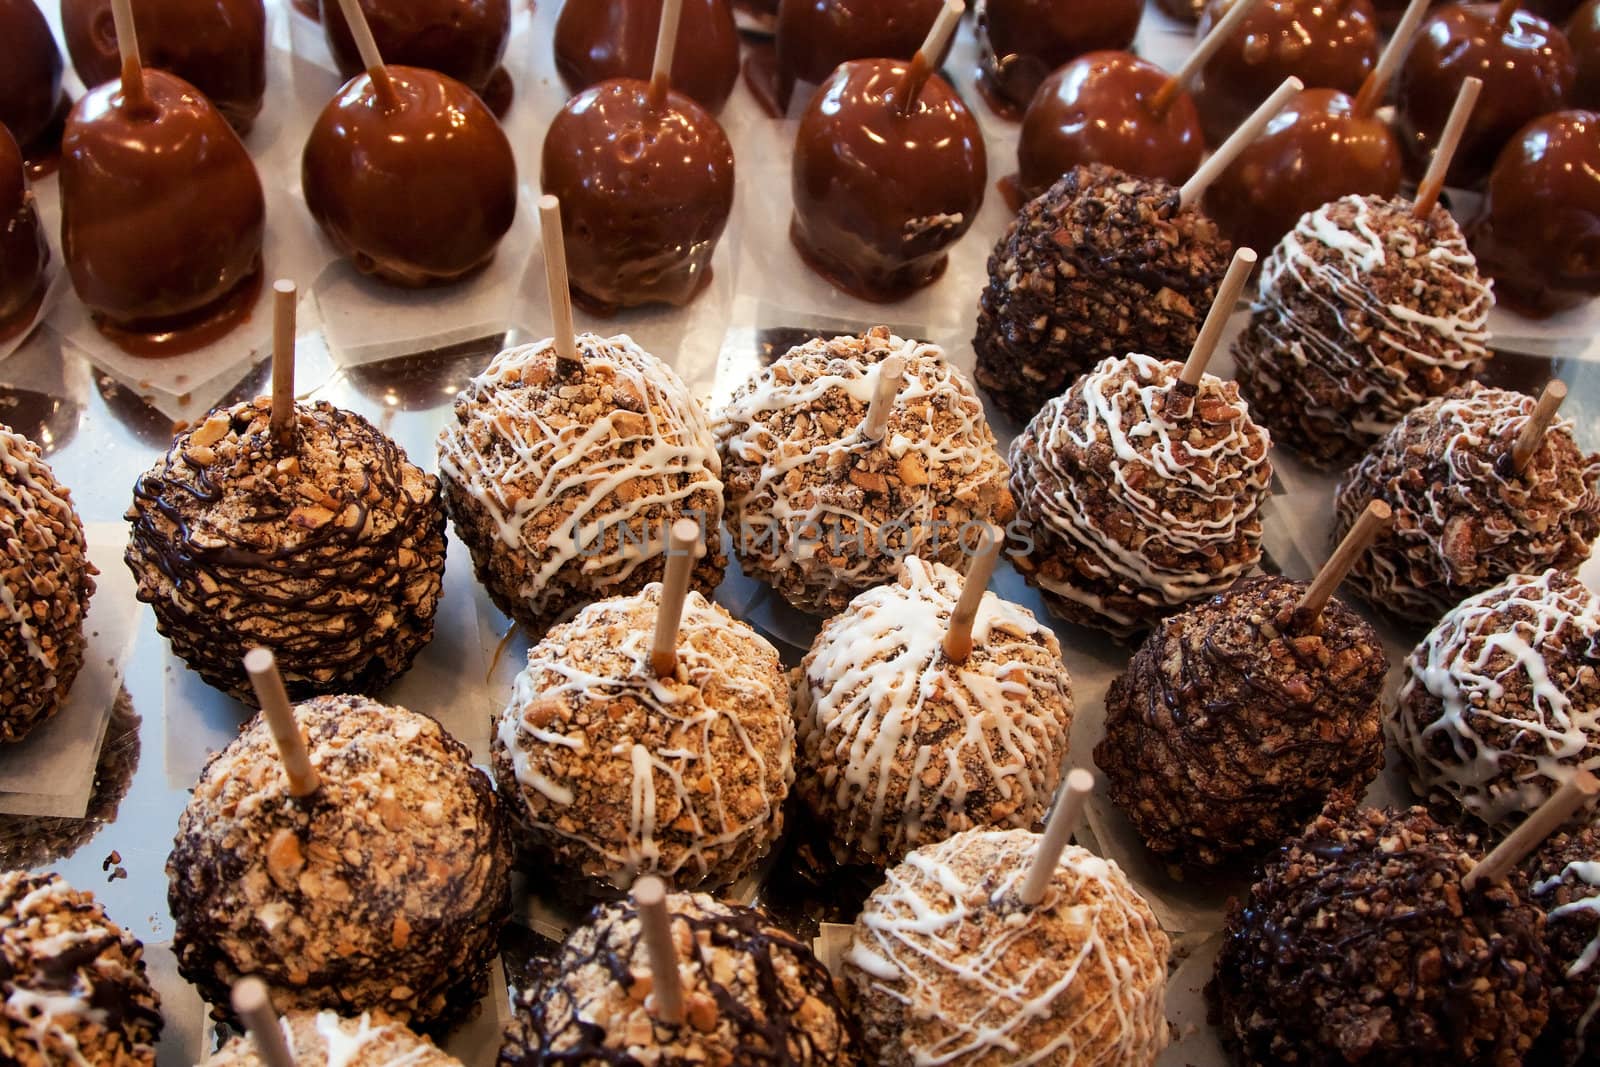 Variety of delicious candy apples covered with white, milk and dark chocolate, caramel and nuts on a stick on display